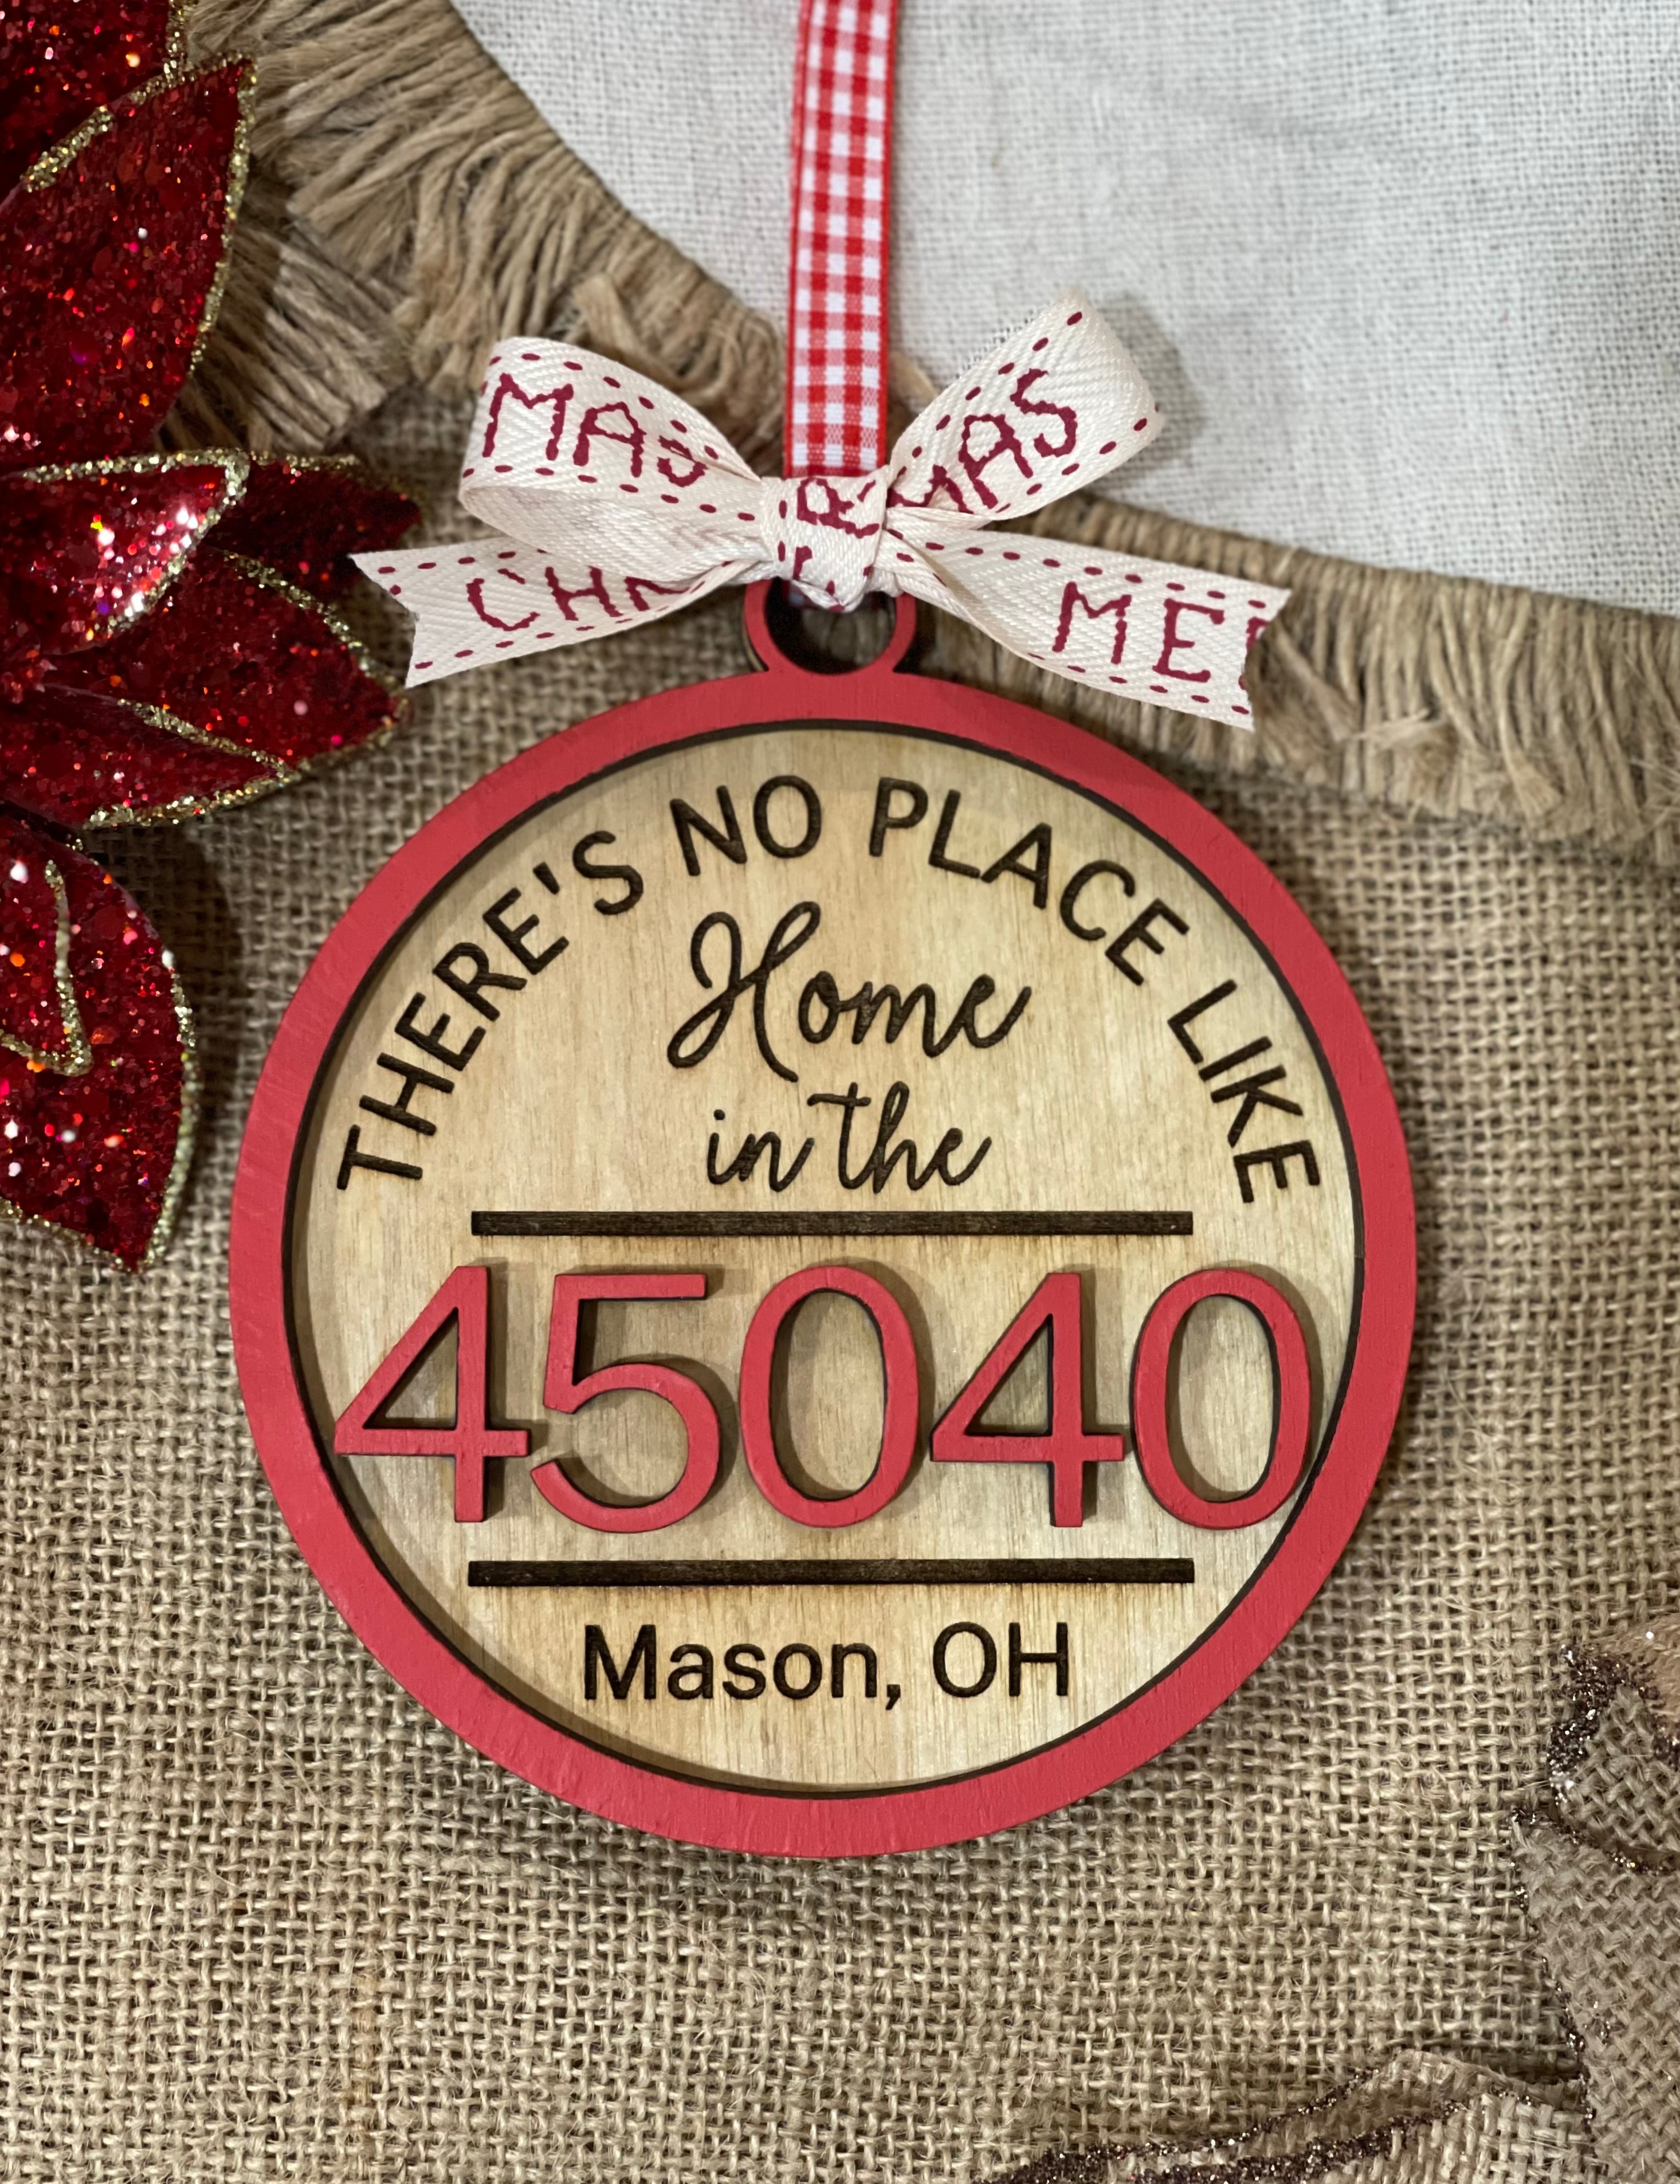 This is an alternate image of the zip code ornament. 